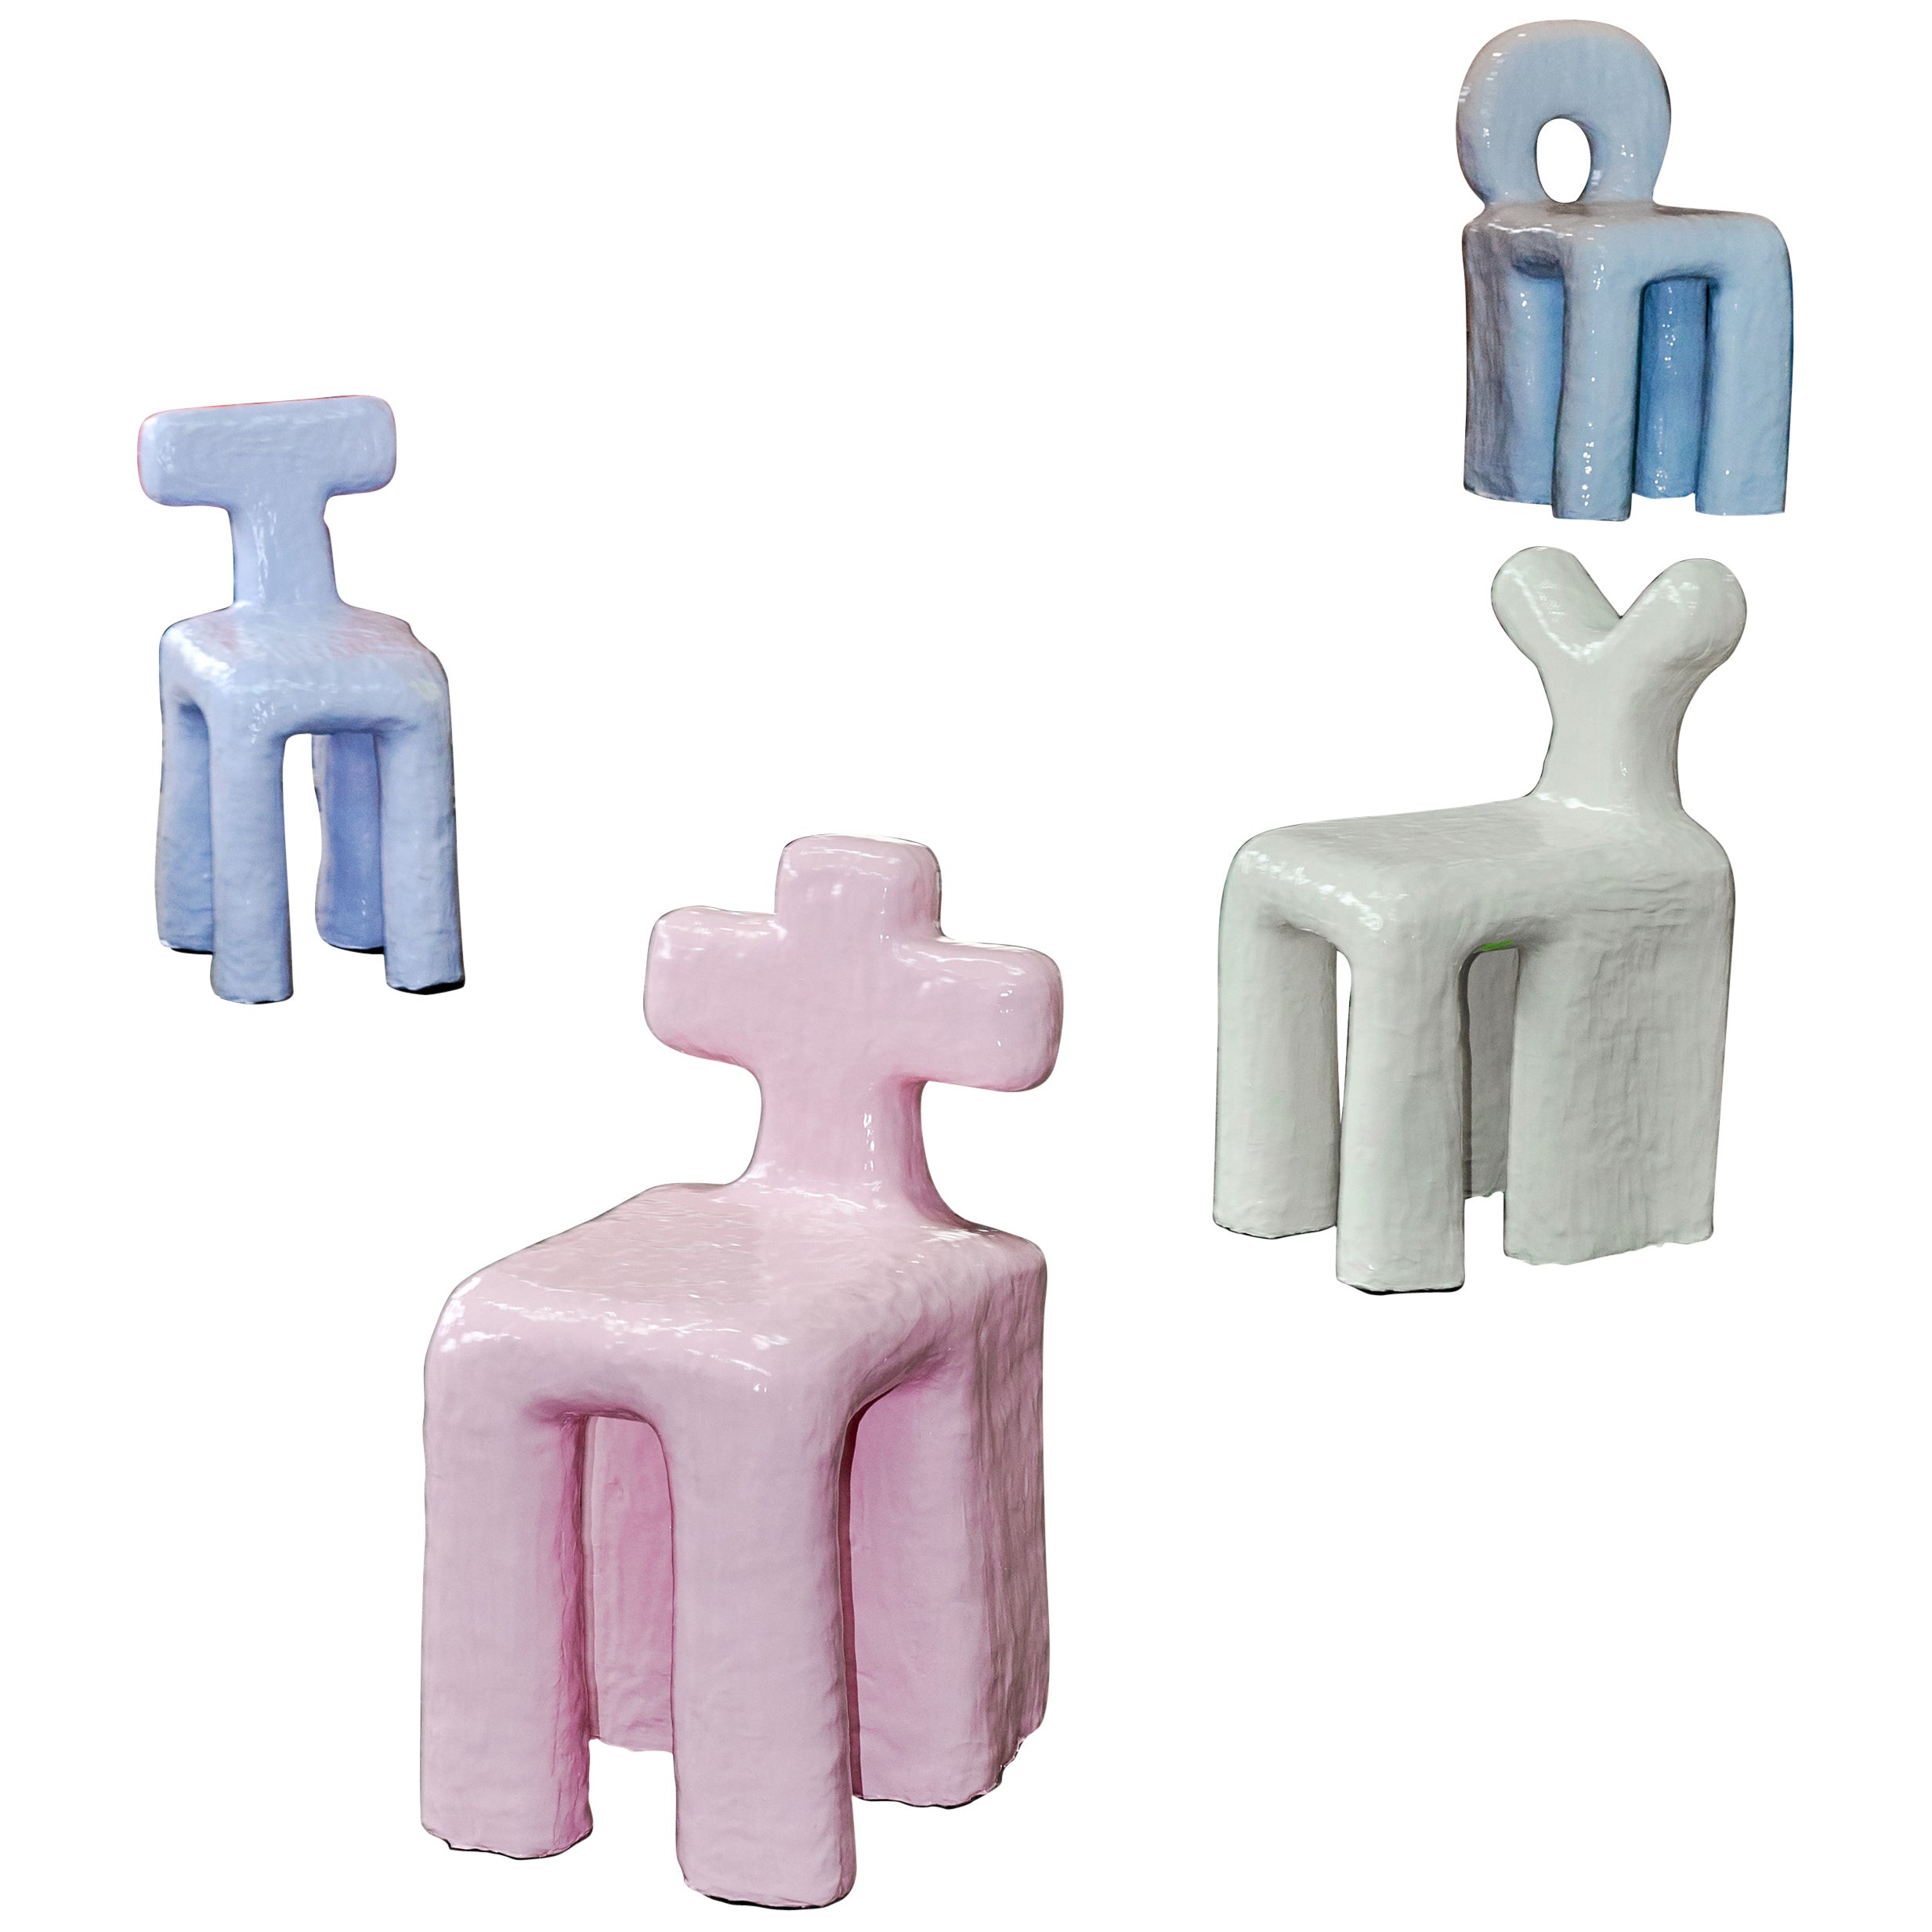 Set of 4 Funky Stools Made in 467 Minutes by Minute Manufacturing